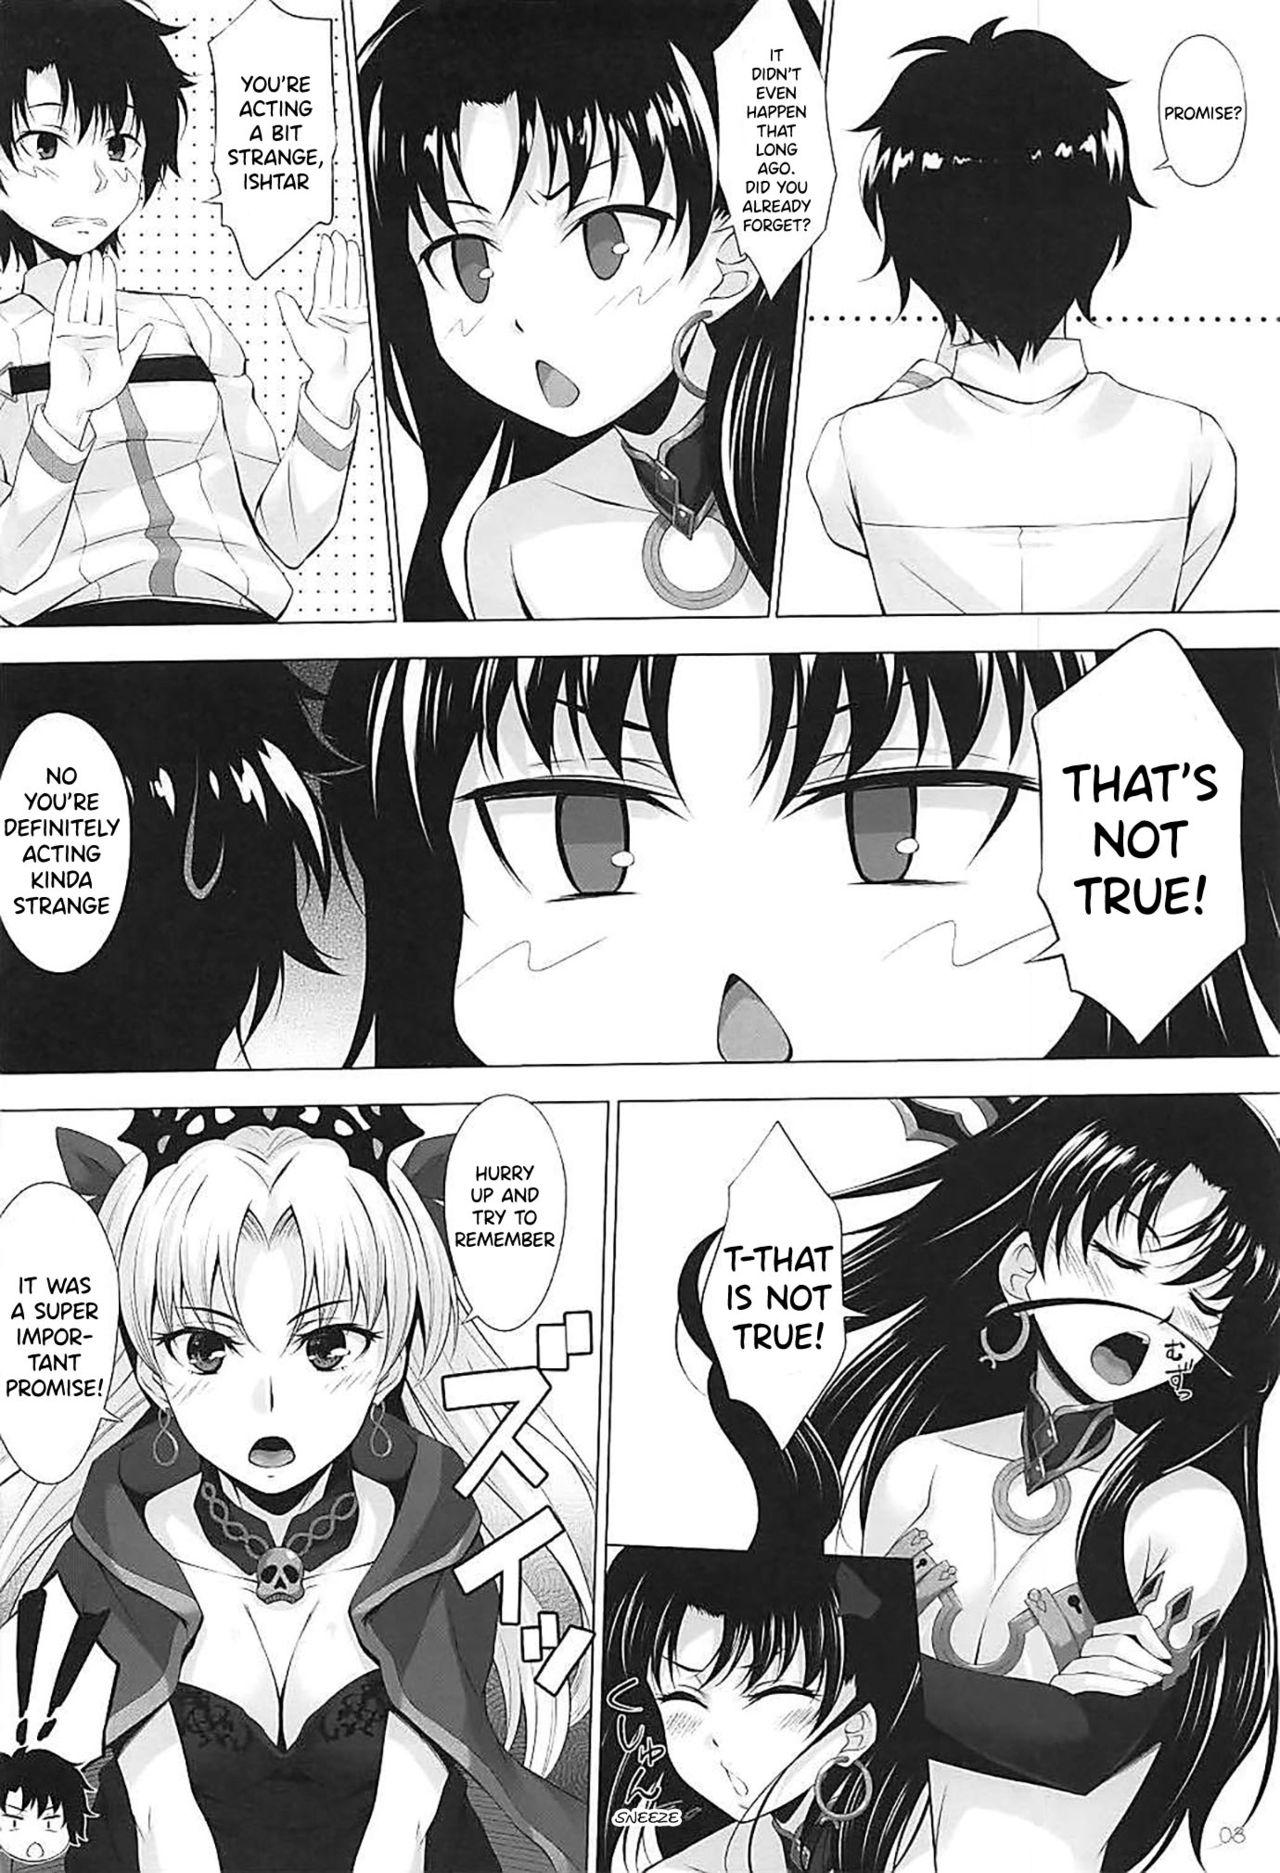 Leaked HELP ME... - Fate grand order Suckingdick - Page 6